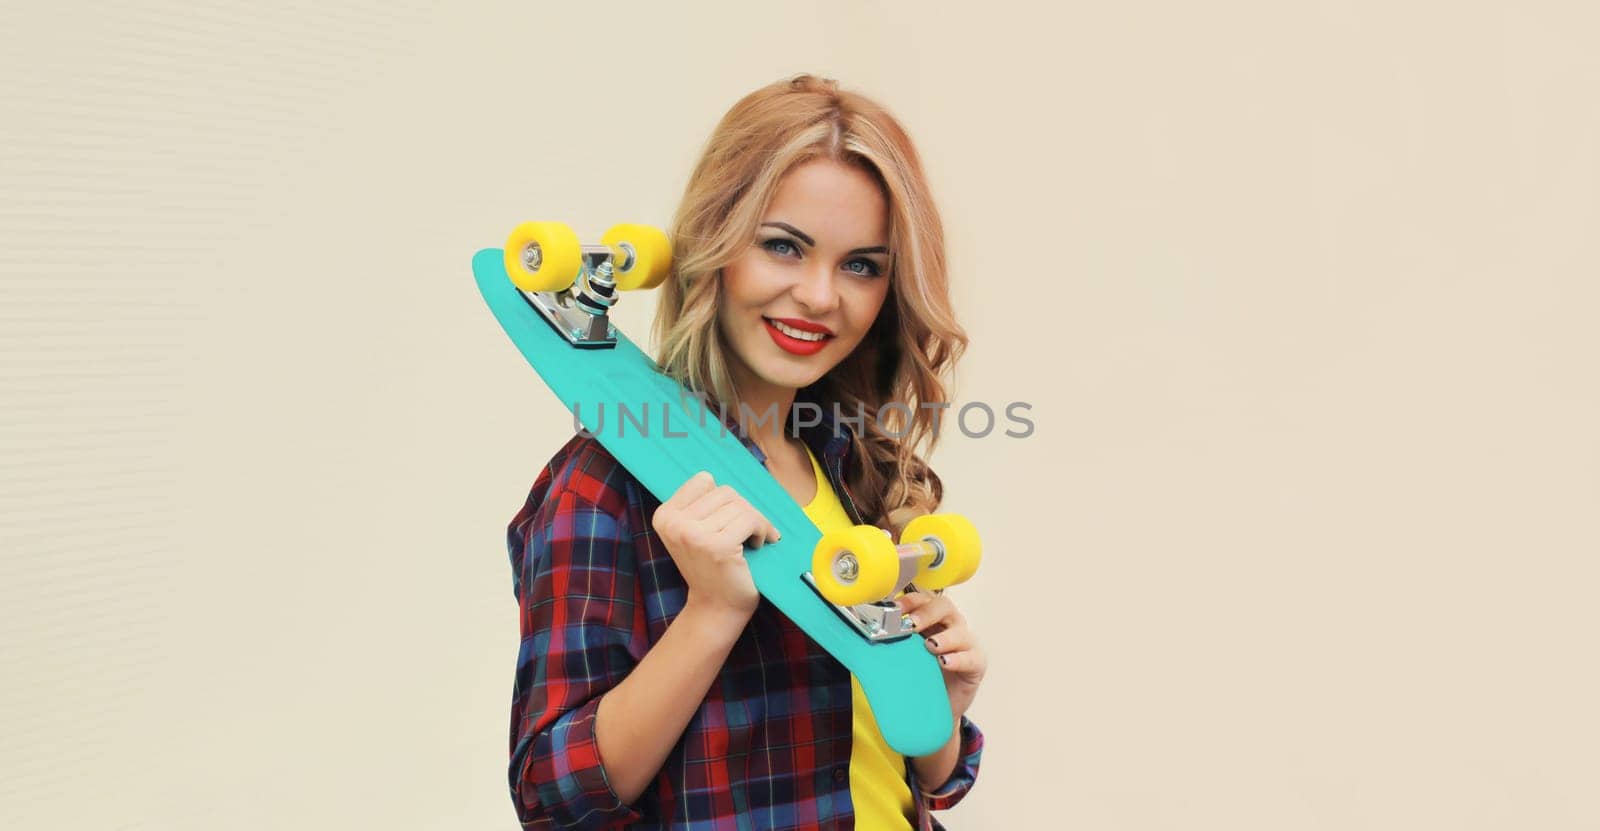 Stylish young blonde woman posing with skateboard on city street by Rohappy